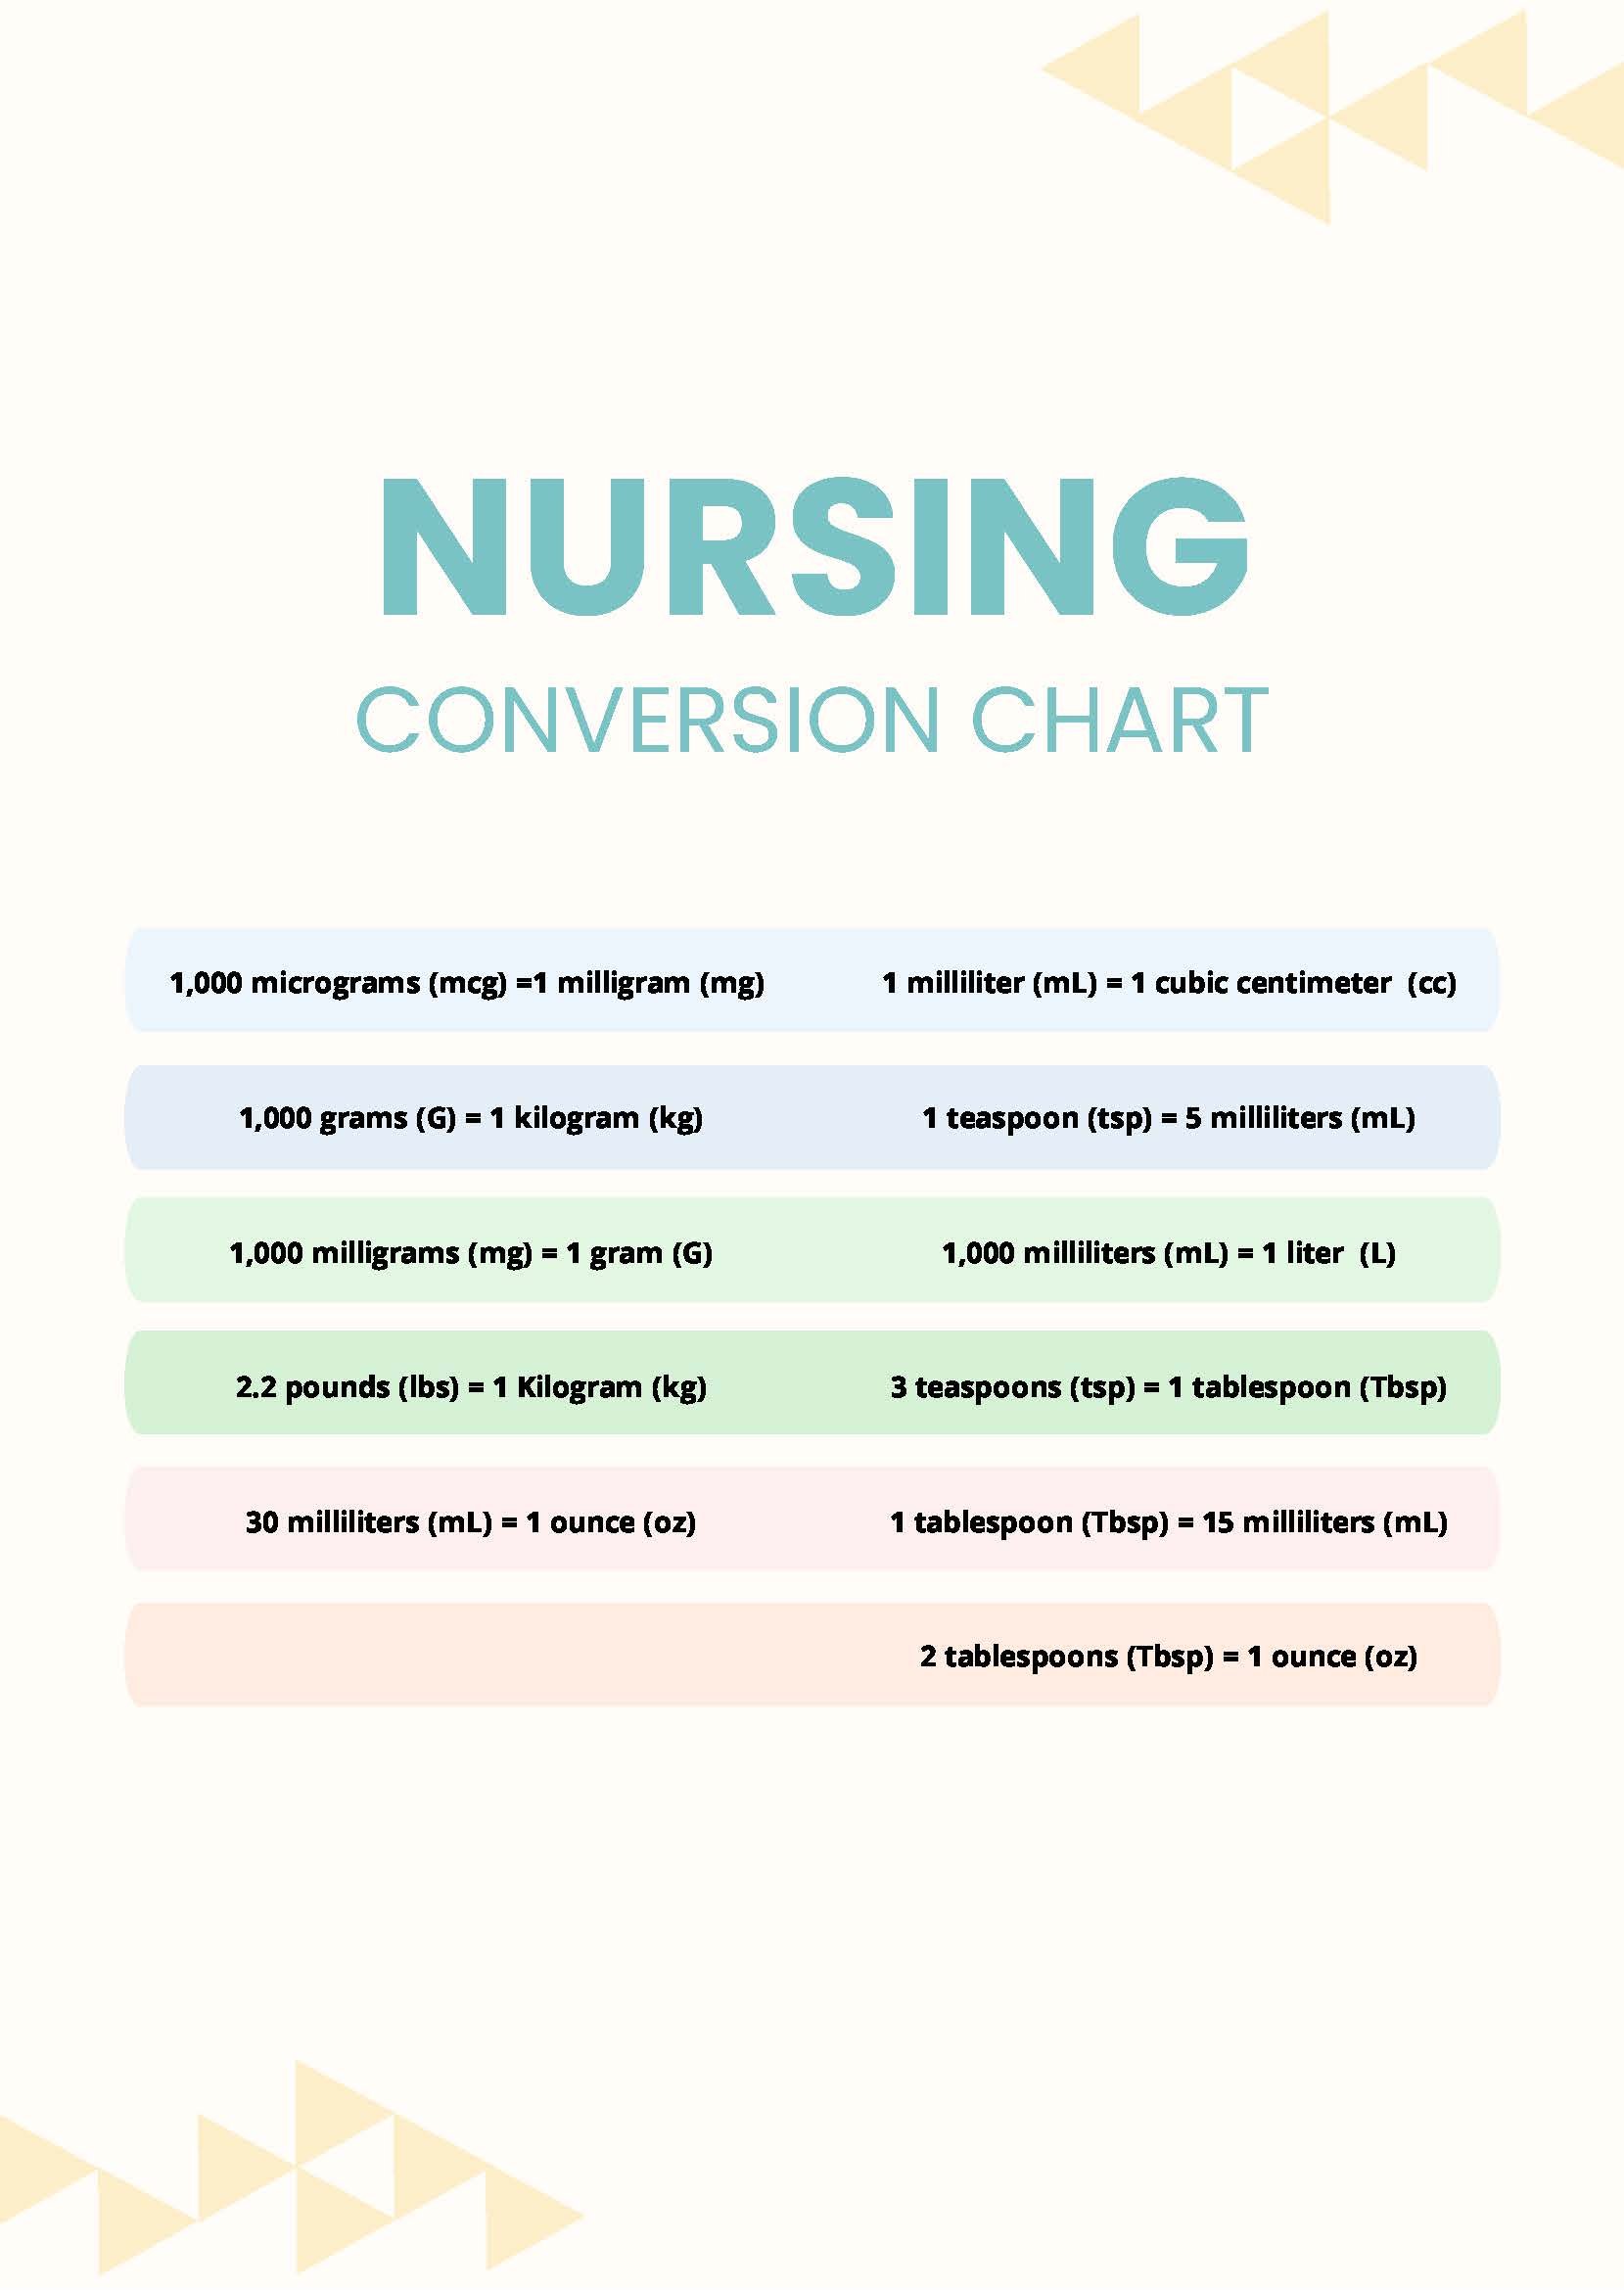 Conversion Chart For Nursing Students